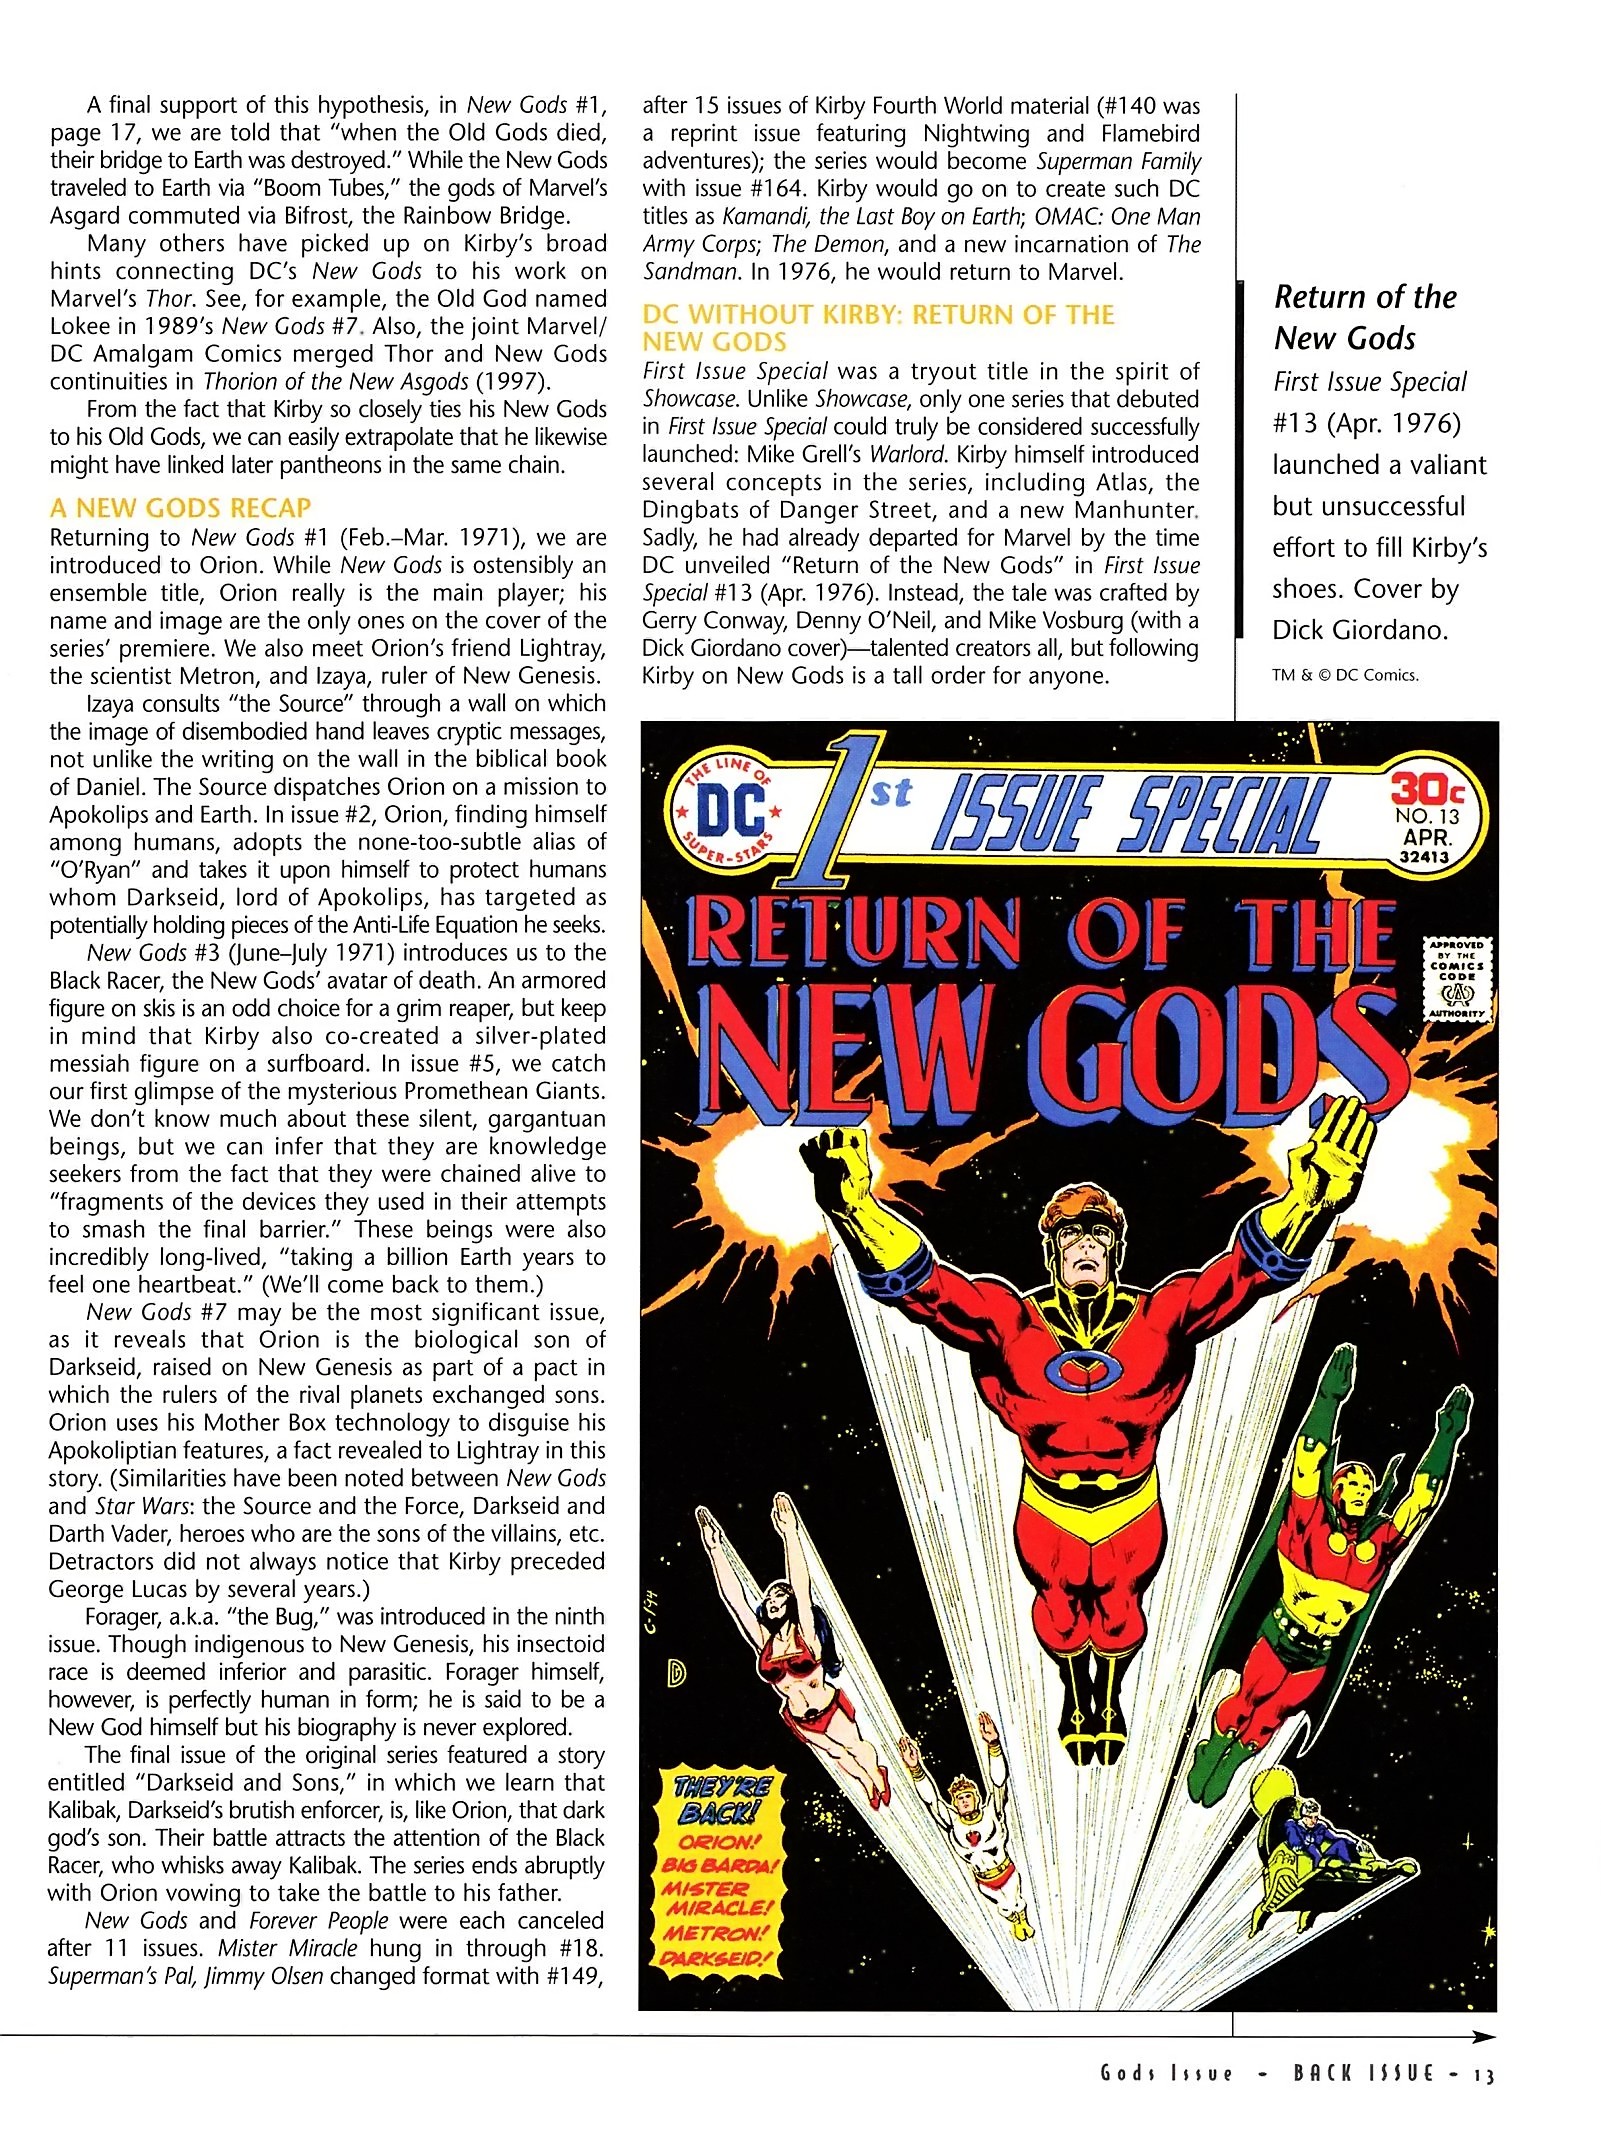 Read online Back Issue comic -  Issue #53 - 15